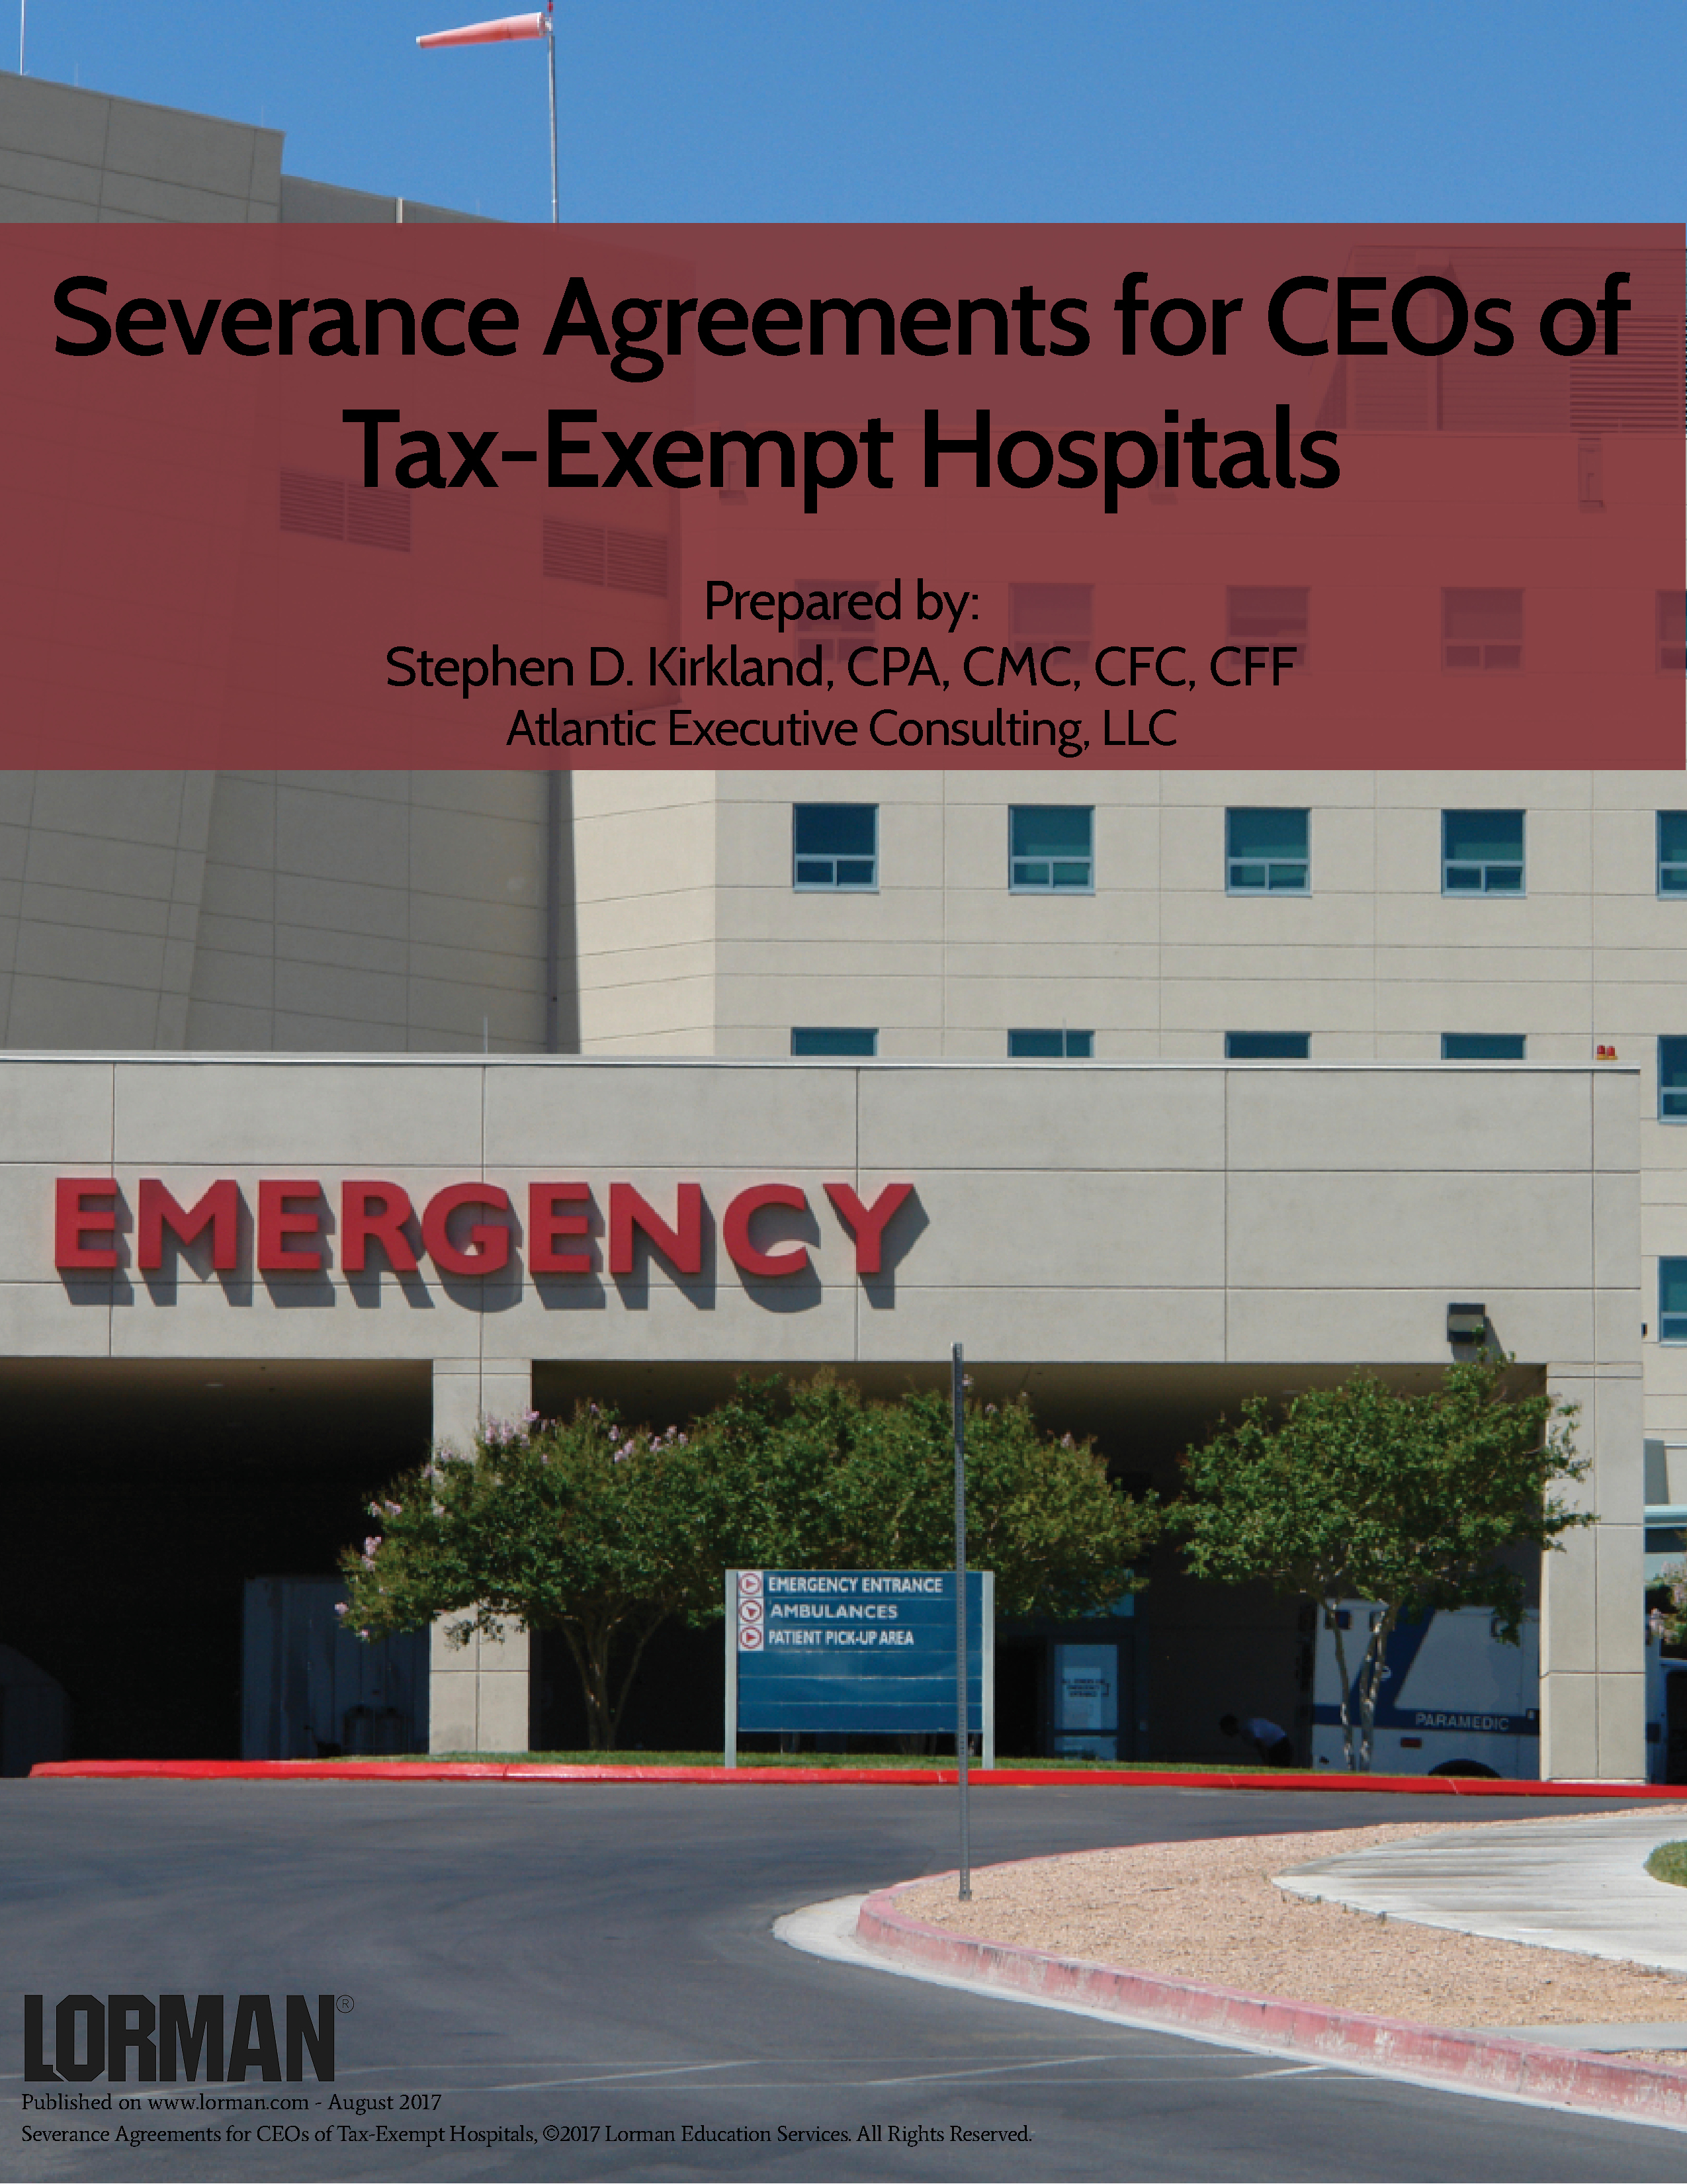 Severance Agreements for CEOs of Tax-Exempt Hospitals